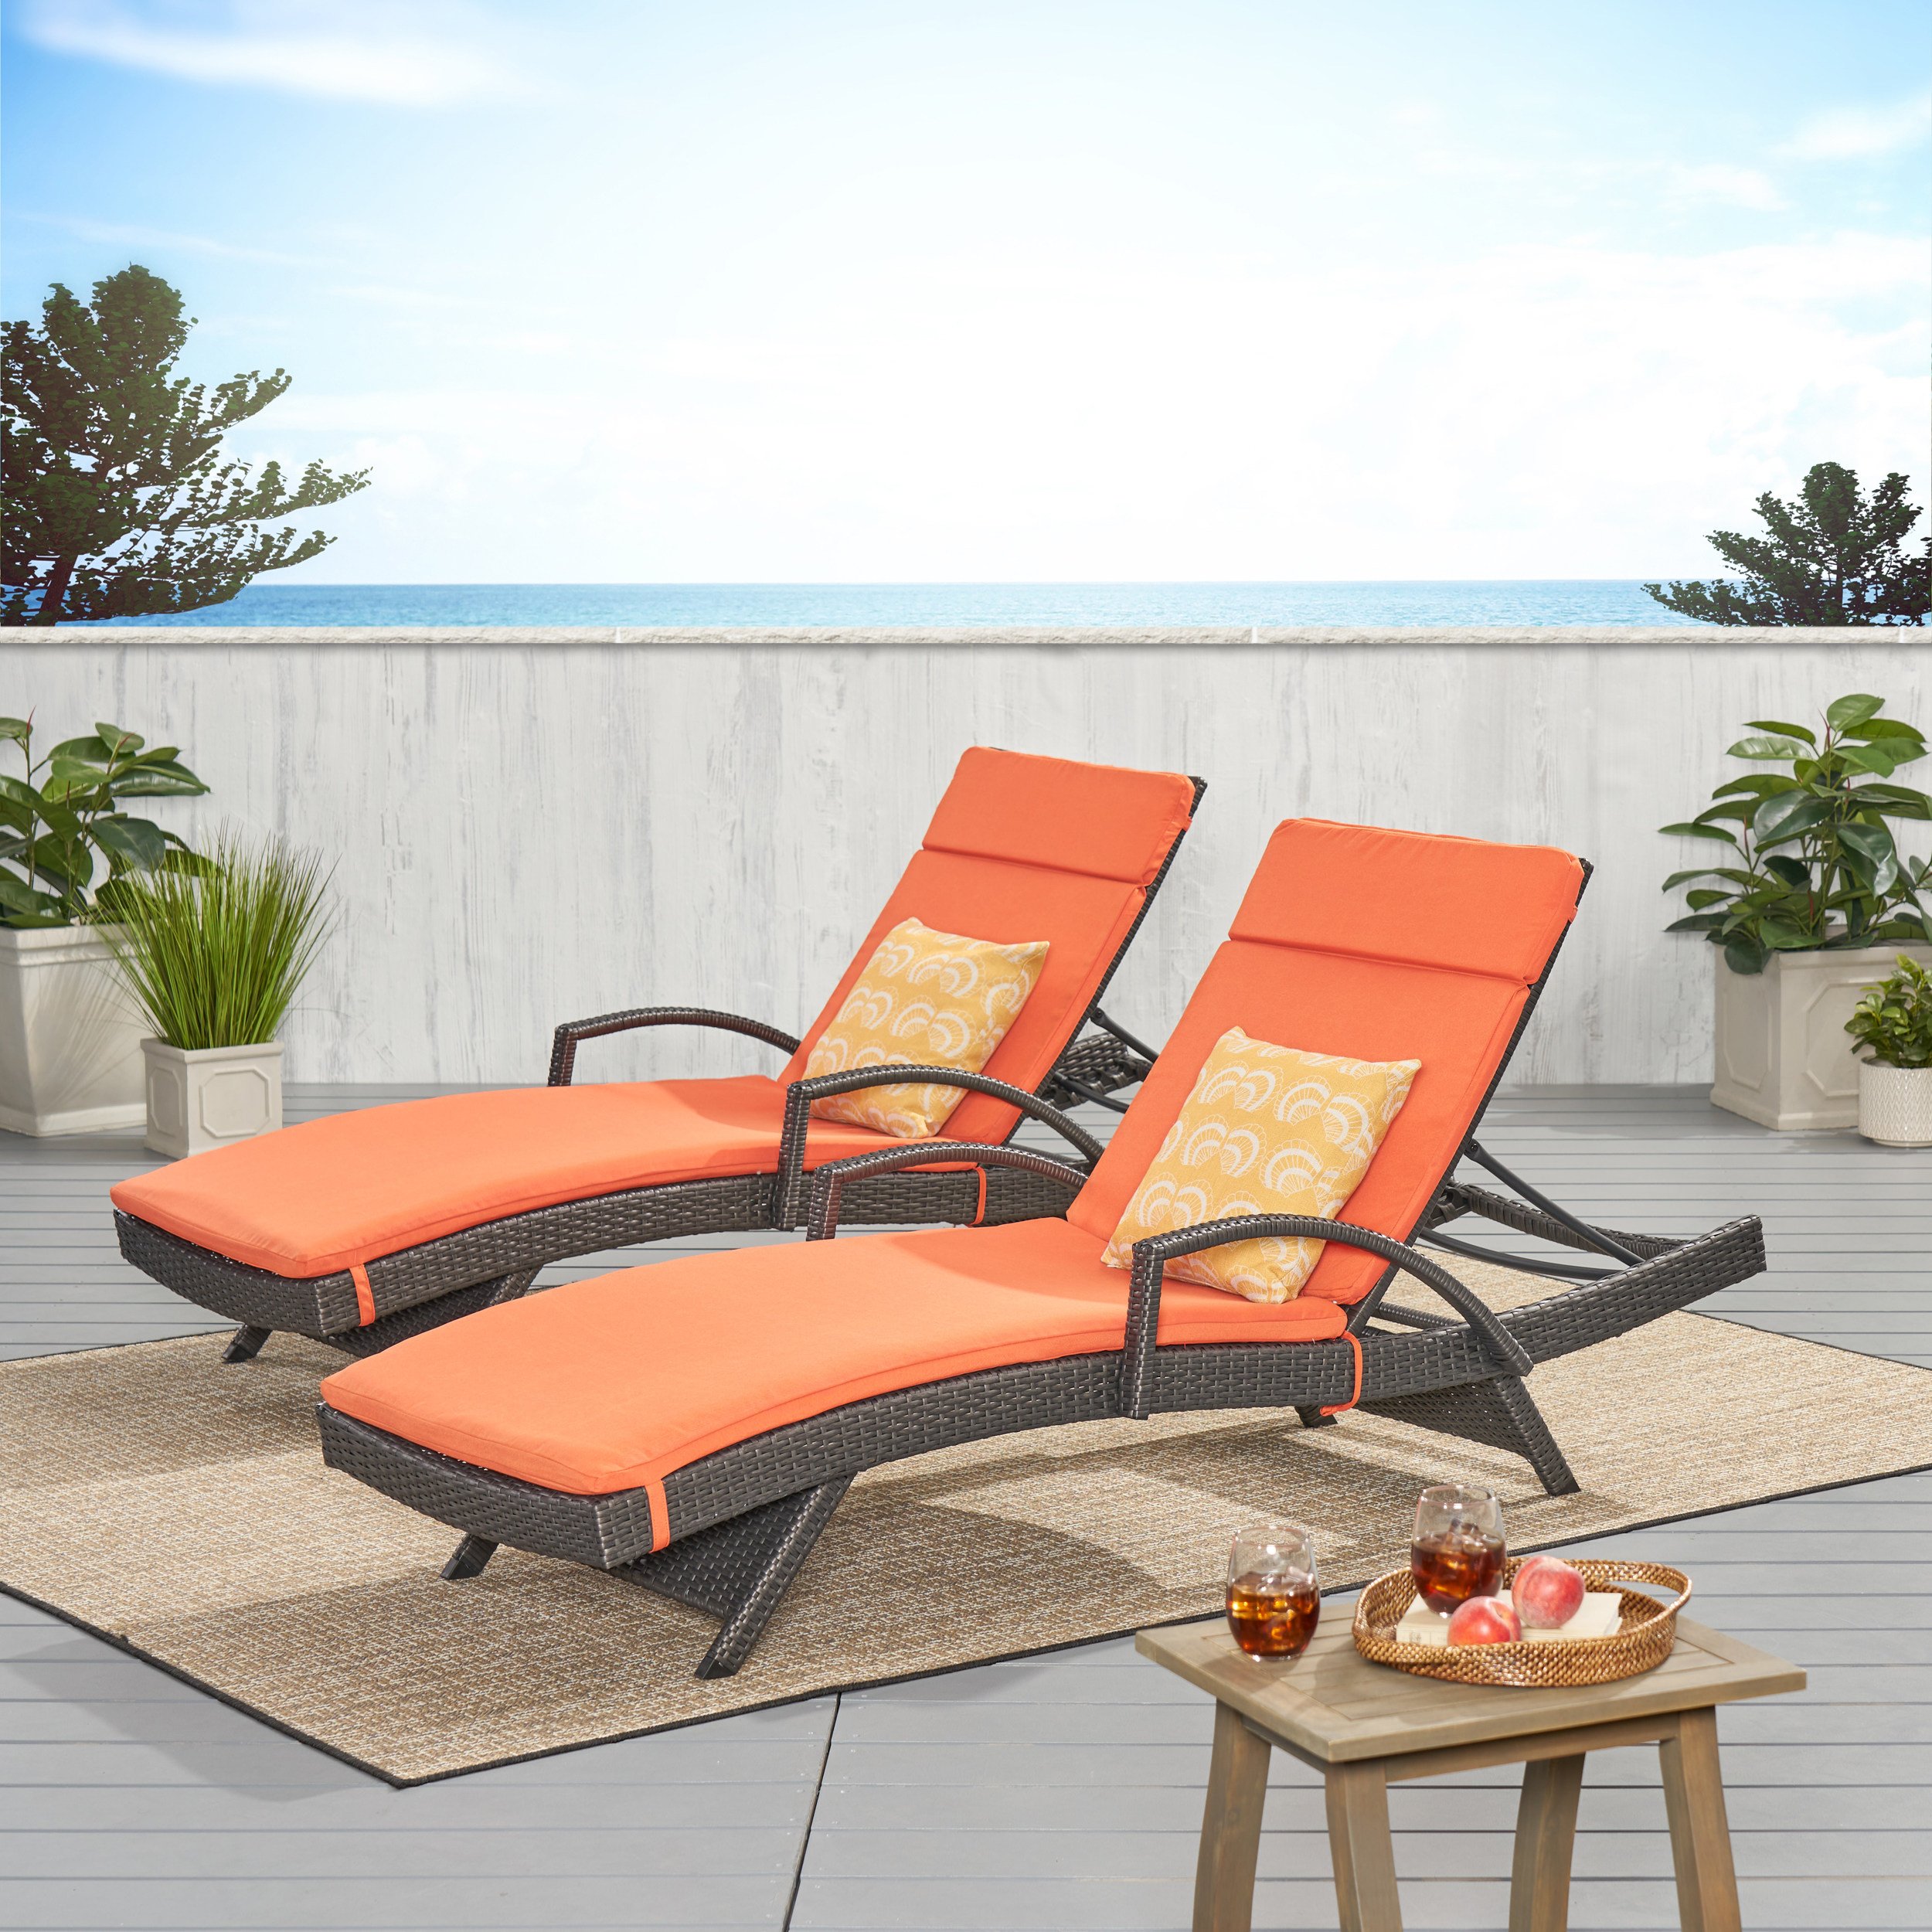 Soleil Outdoor Wicker Chaise Lounges With Water Resistant Cushions (Set Of 2) - Red